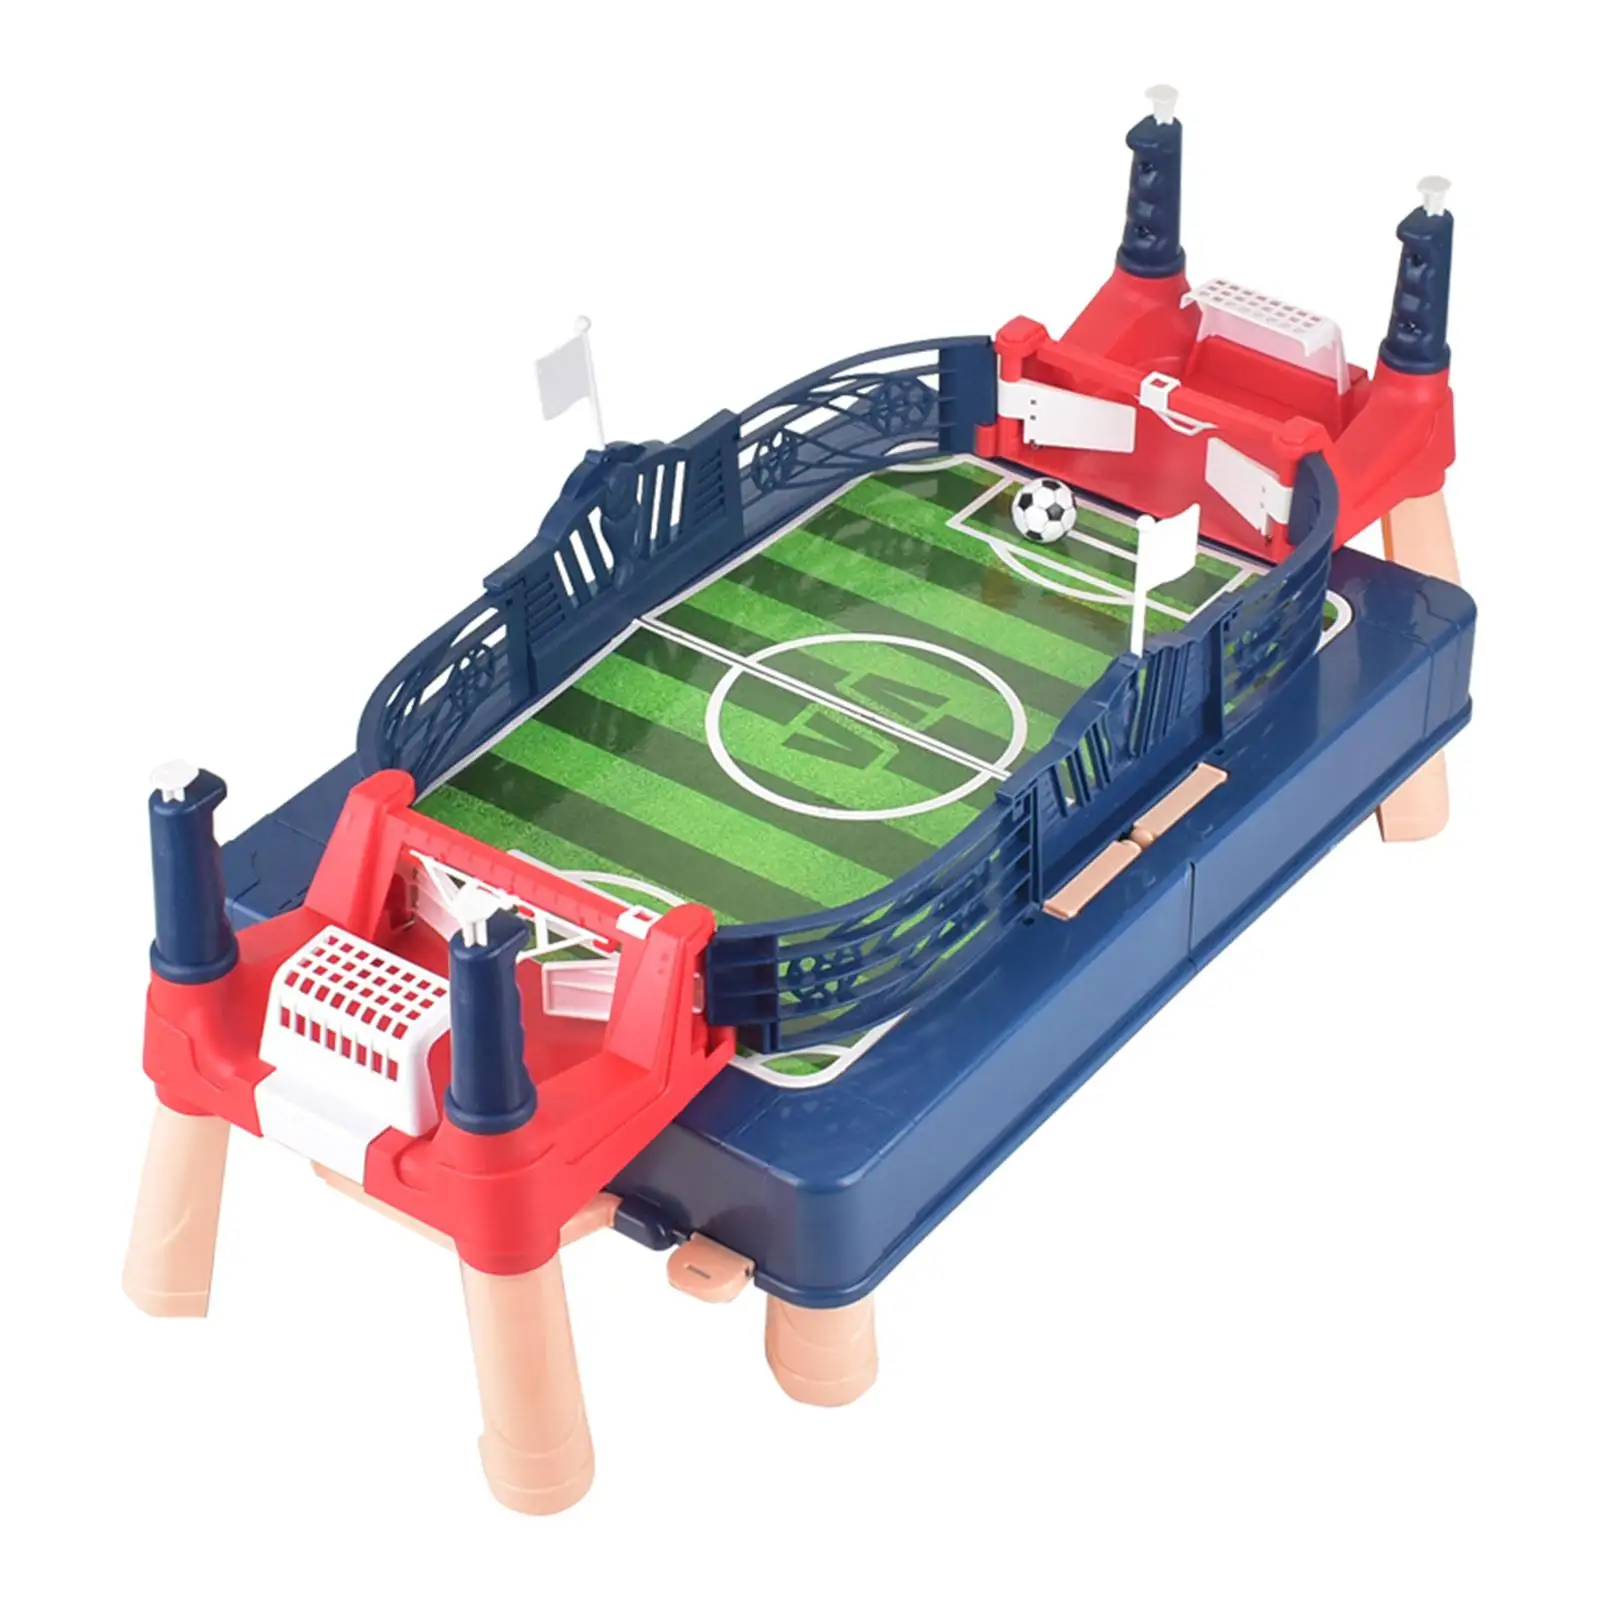 Small Competitive Soccer Games Play Ball Toys Party Game for Boys and Girls